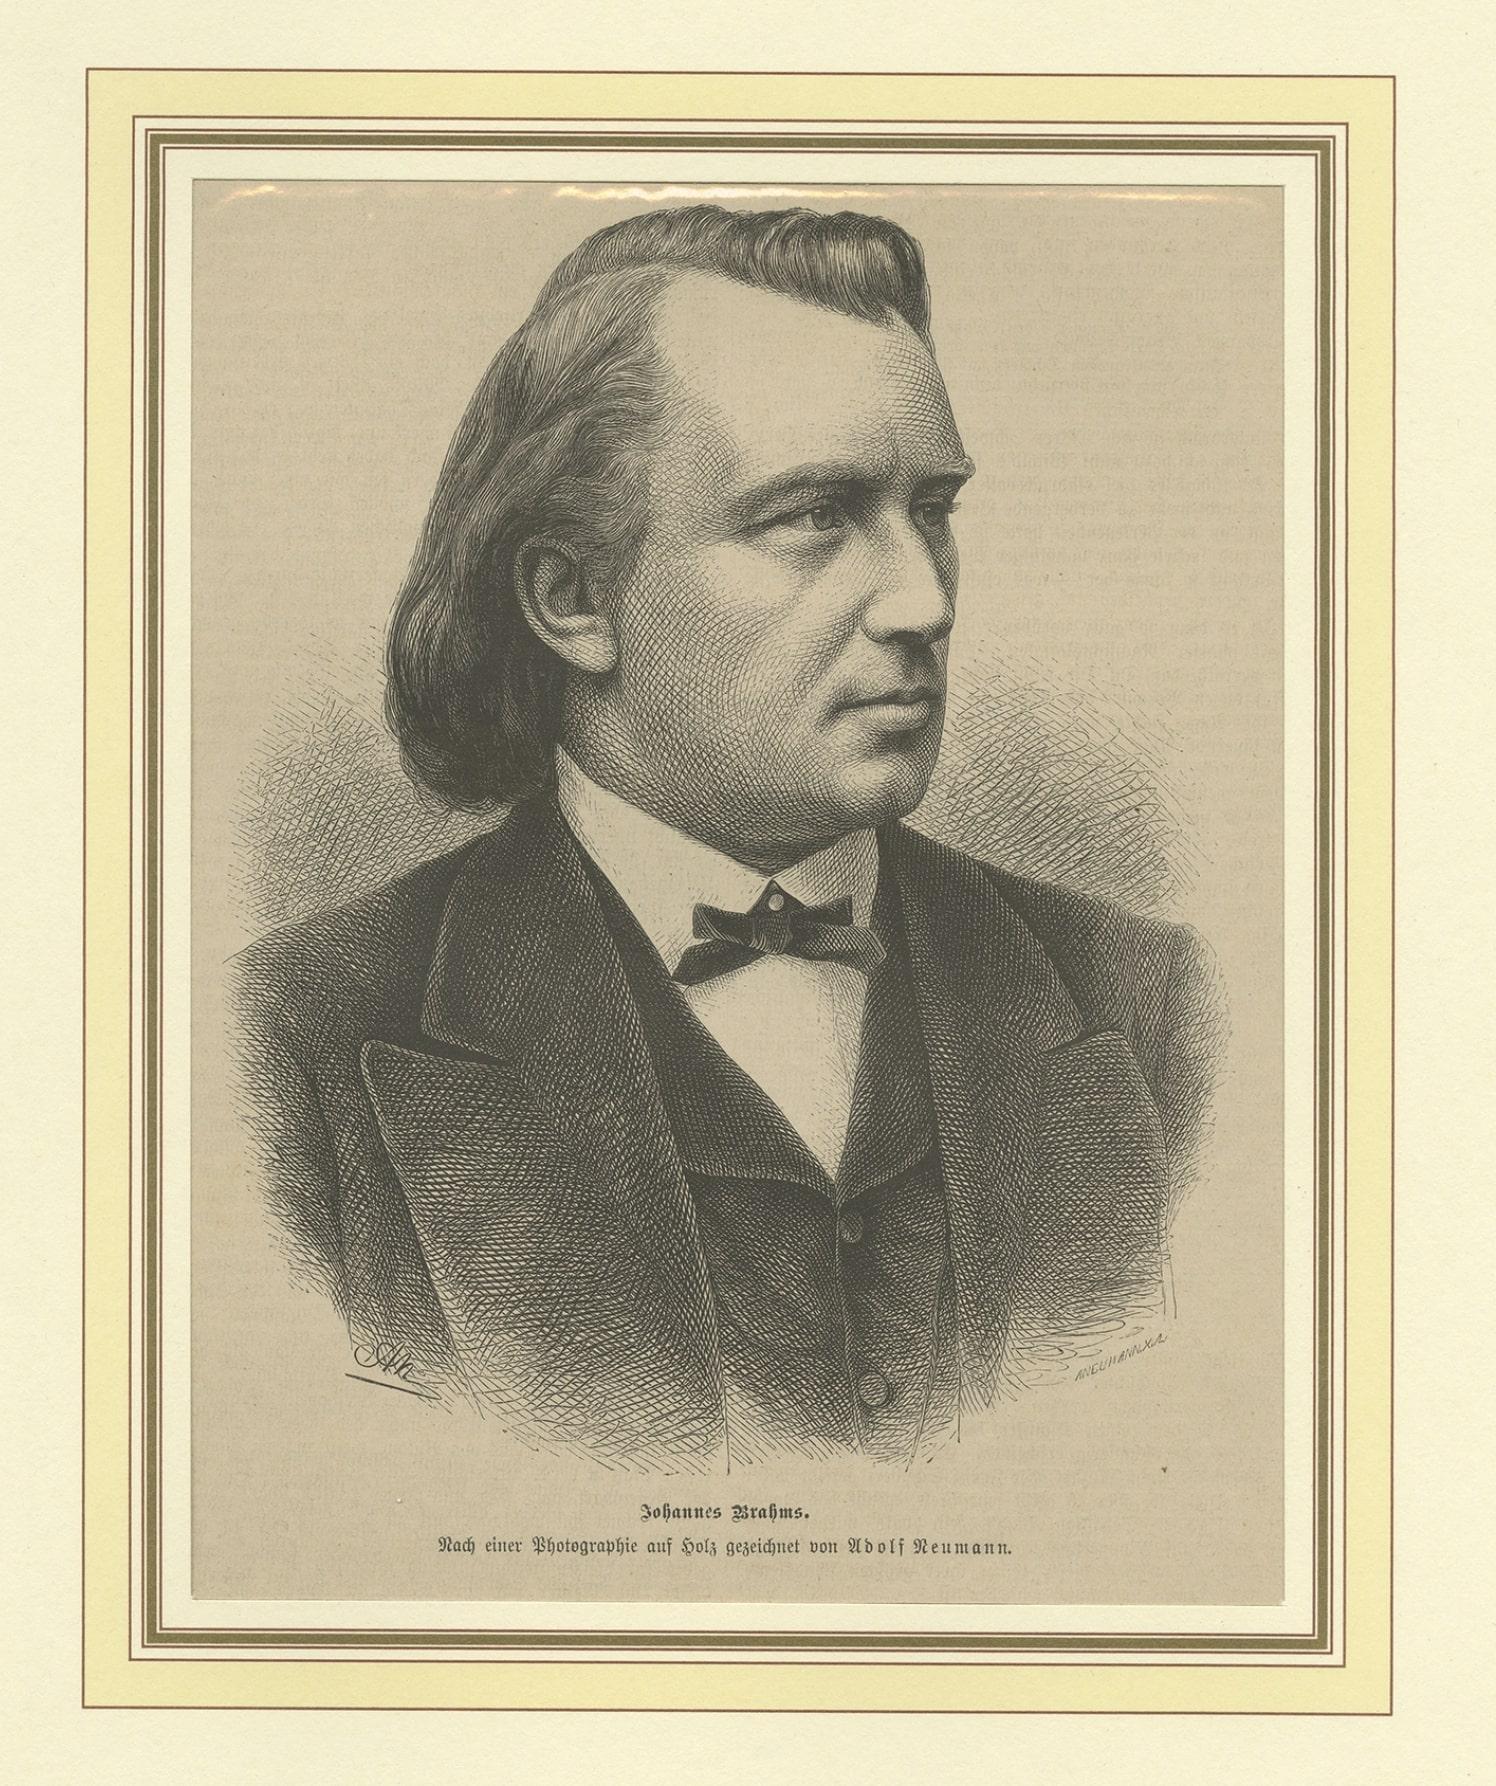 Antique print titled 'Johannes Brahms'. 

Portrait of Johannes Brahms. Johannes Brahms was a German composer, pianist, and conductor of the Romantic period.

Artists and Engravers: Anonymous.

Condition: Good, age-related toning. This print is